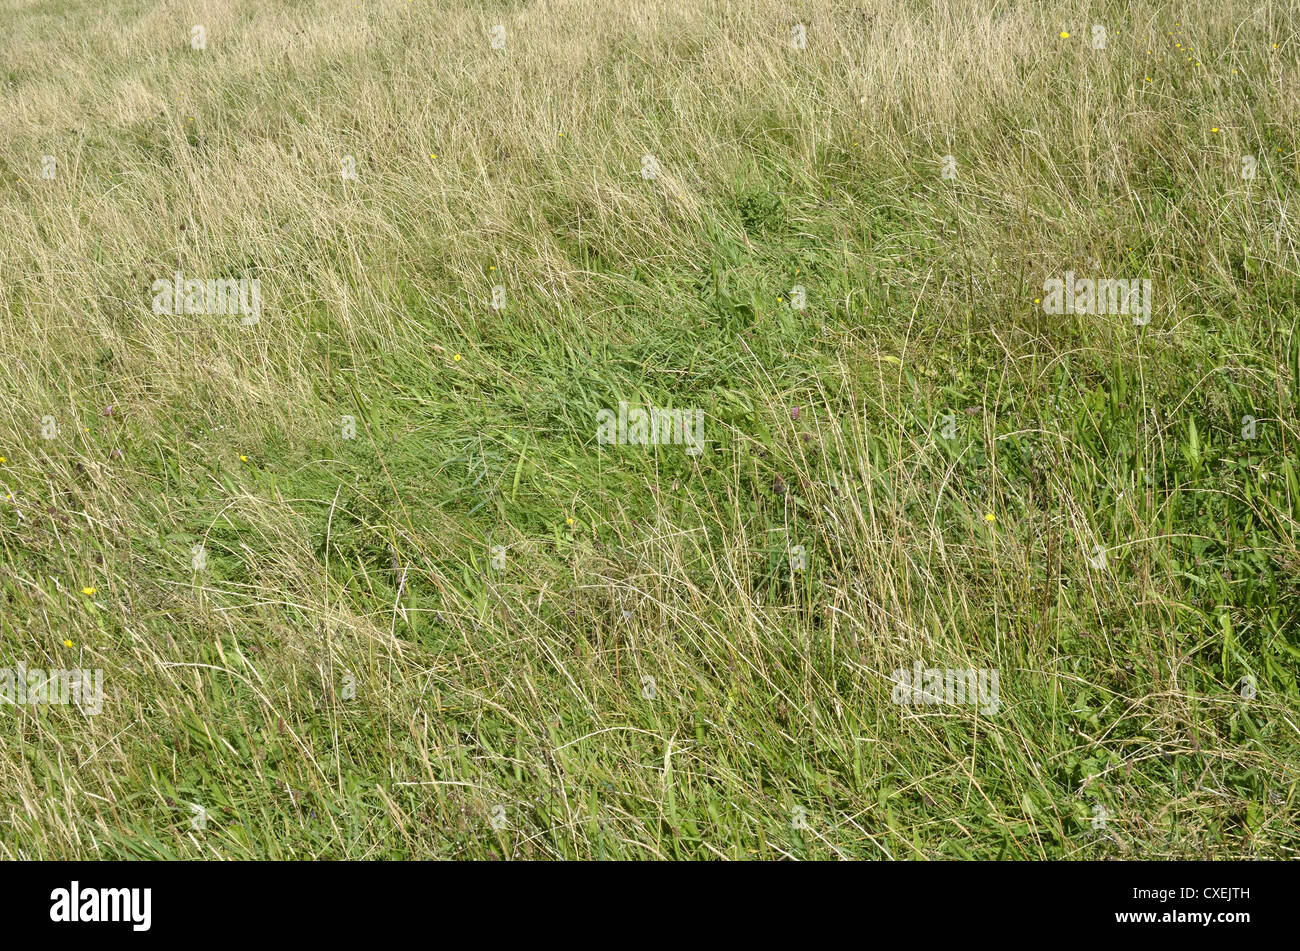 Swathe of grass pasture during late summer months. Stock Photo